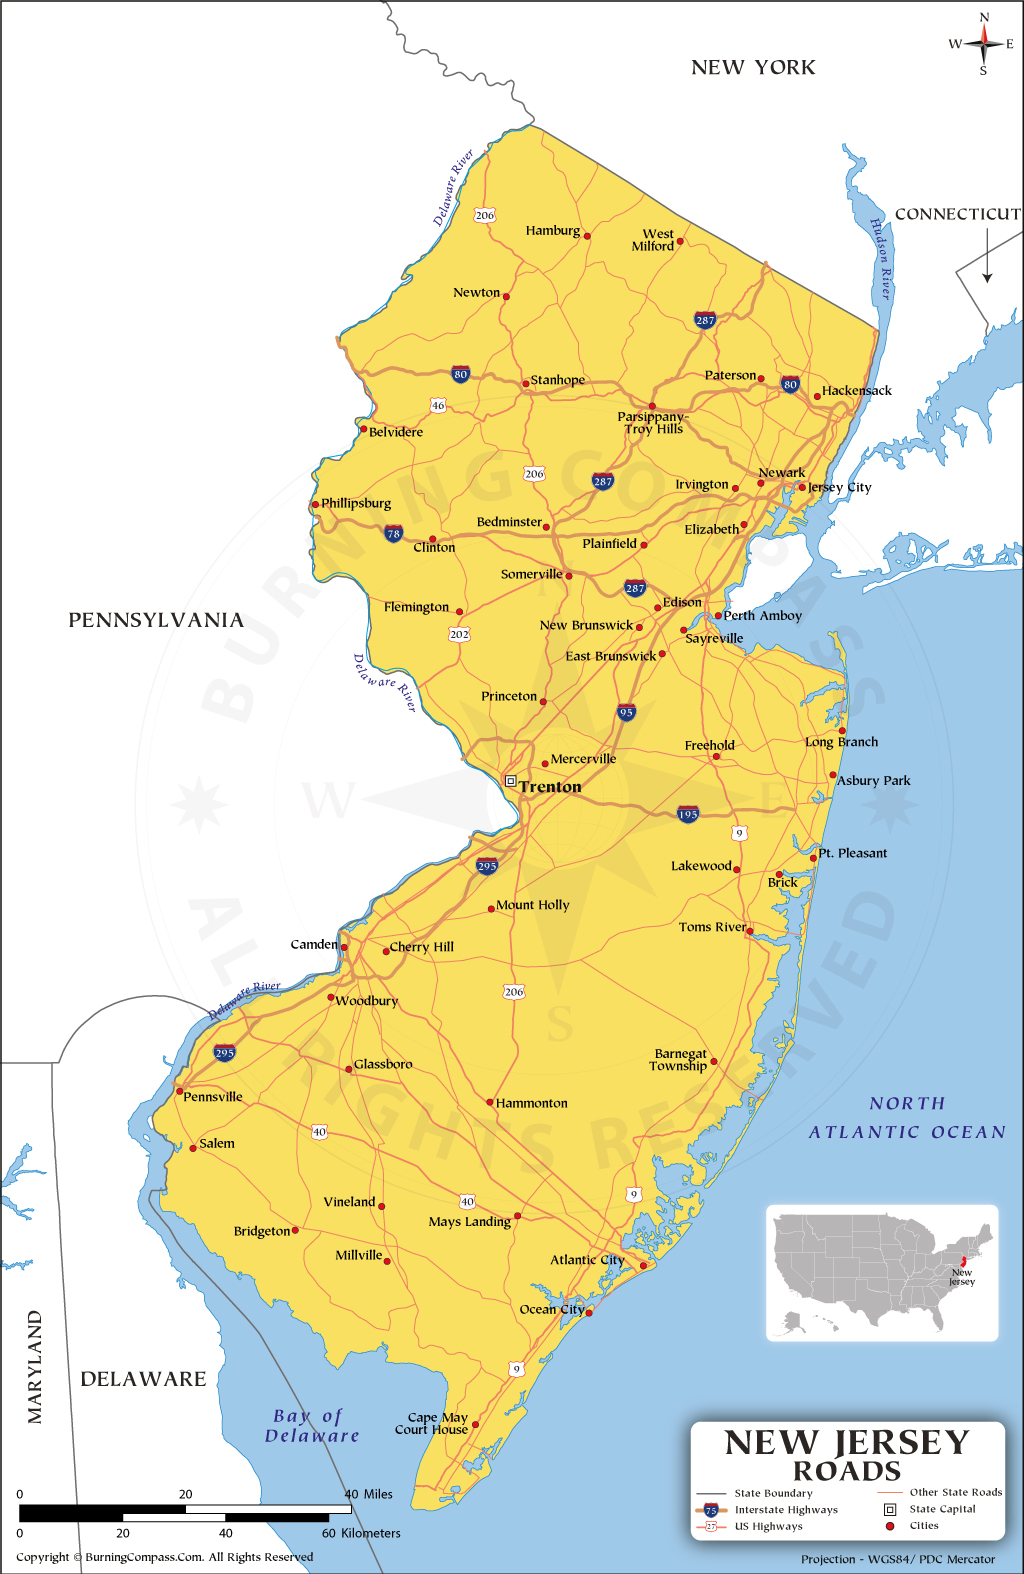 New Jersey Road Map with Interstate Highways and US Highways